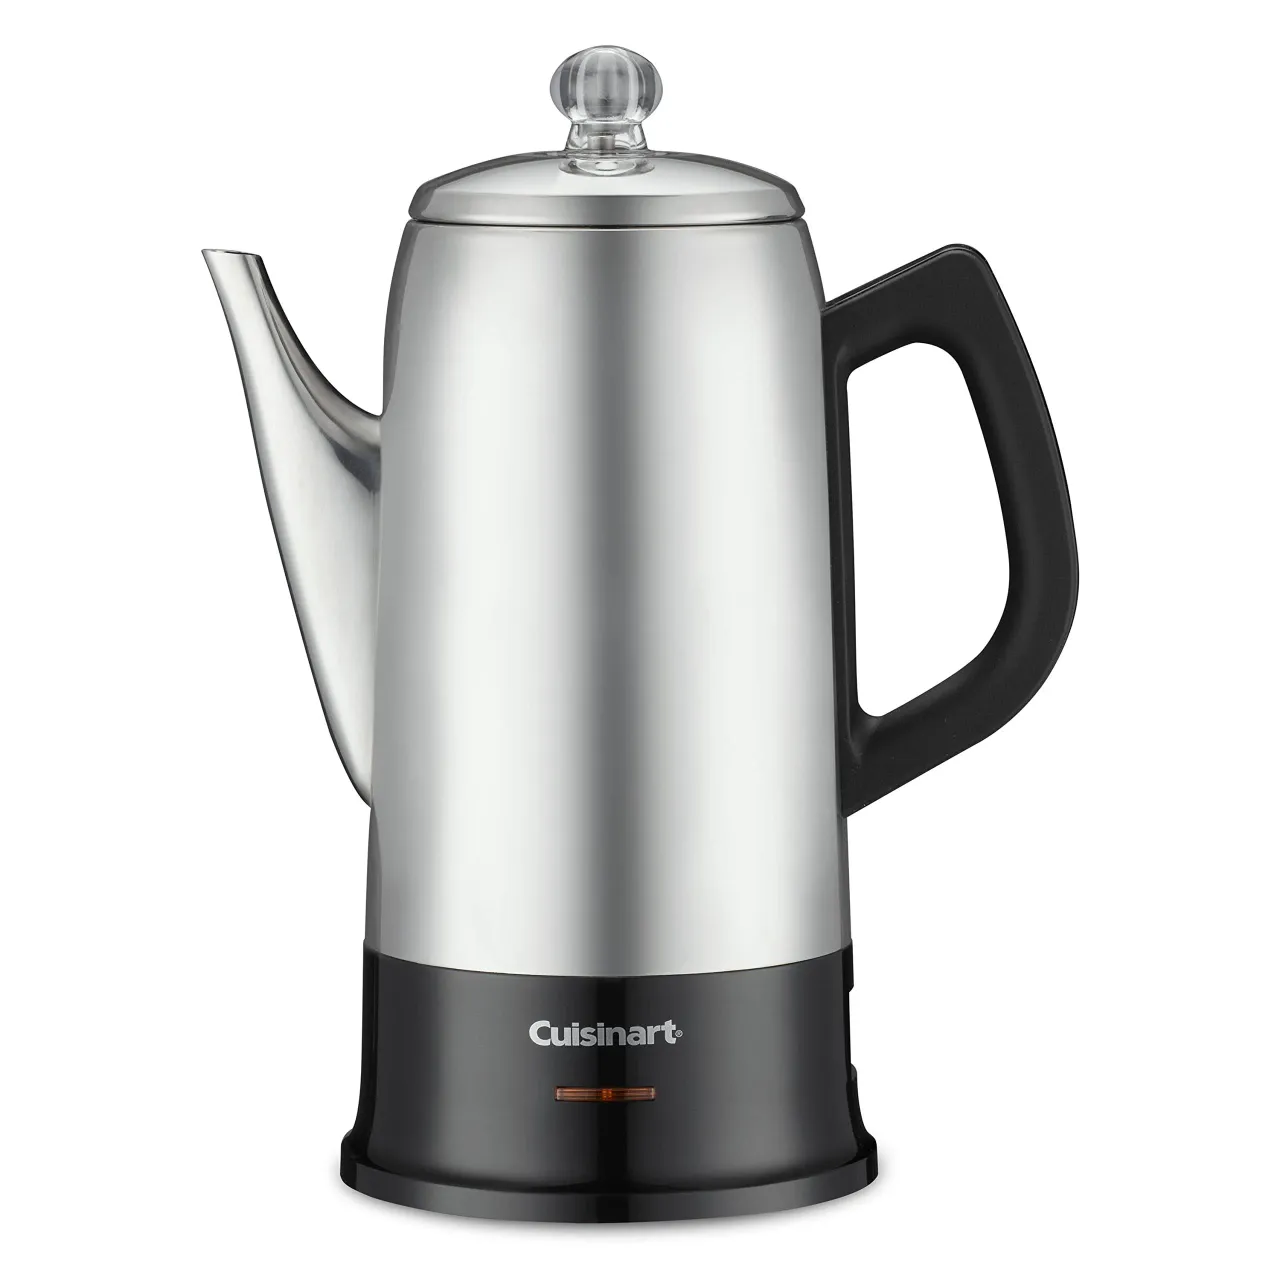 1 Classic Stainless-Steel Percolator by Cuisinart, with a 12-Cup Capacity and a sleek Black/Stainless Finish.